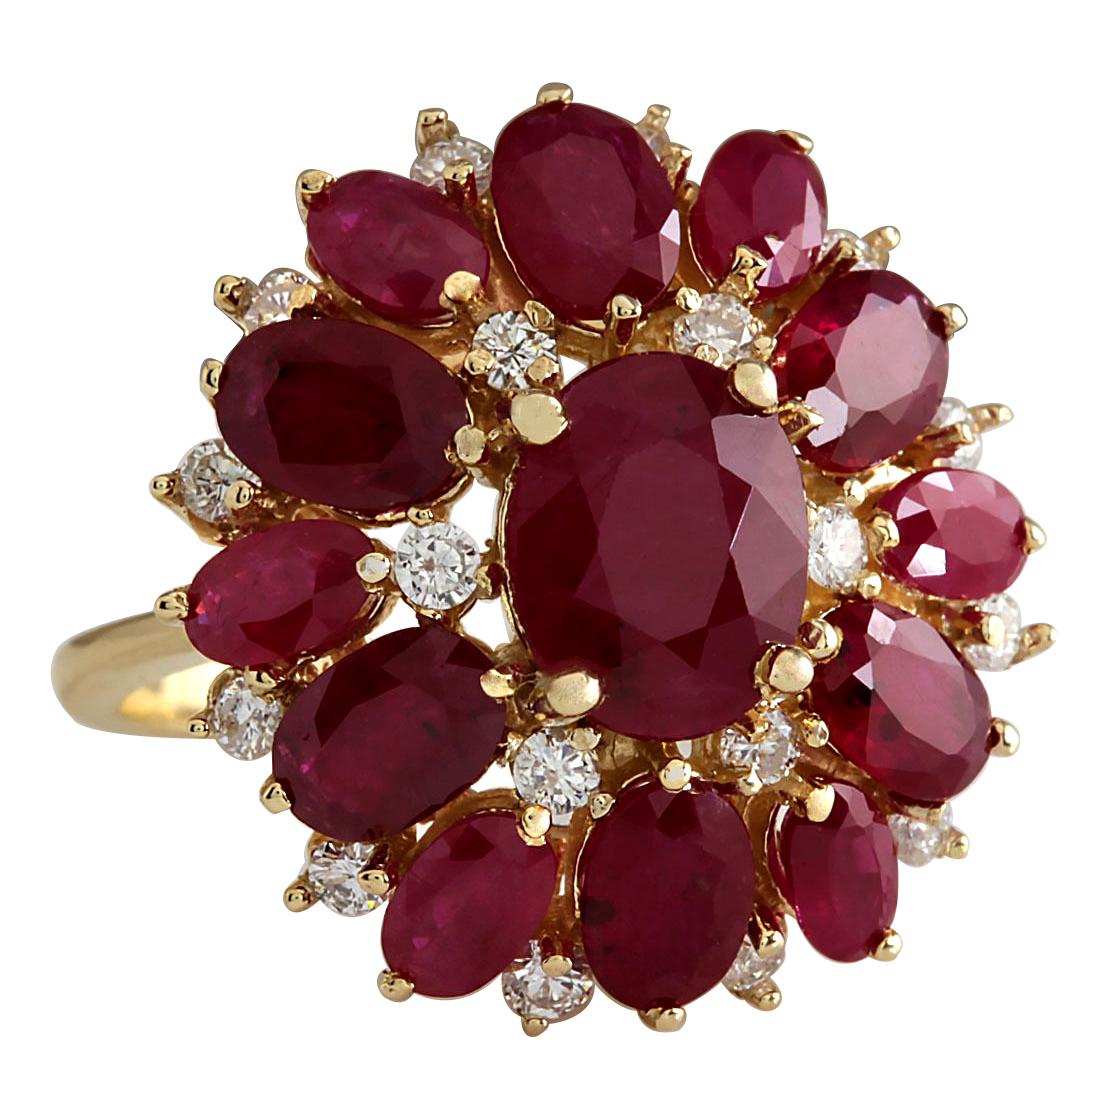 Elevate your style with this exquisite 7.47 Carat Natural Ruby 14 Karat Yellow Gold Diamond Ring. Crafted from luxurious 14K Yellow Gold and stamped for authenticity, this ring weighs 6.5 grams, ensuring both elegance and durability. The centerpiece